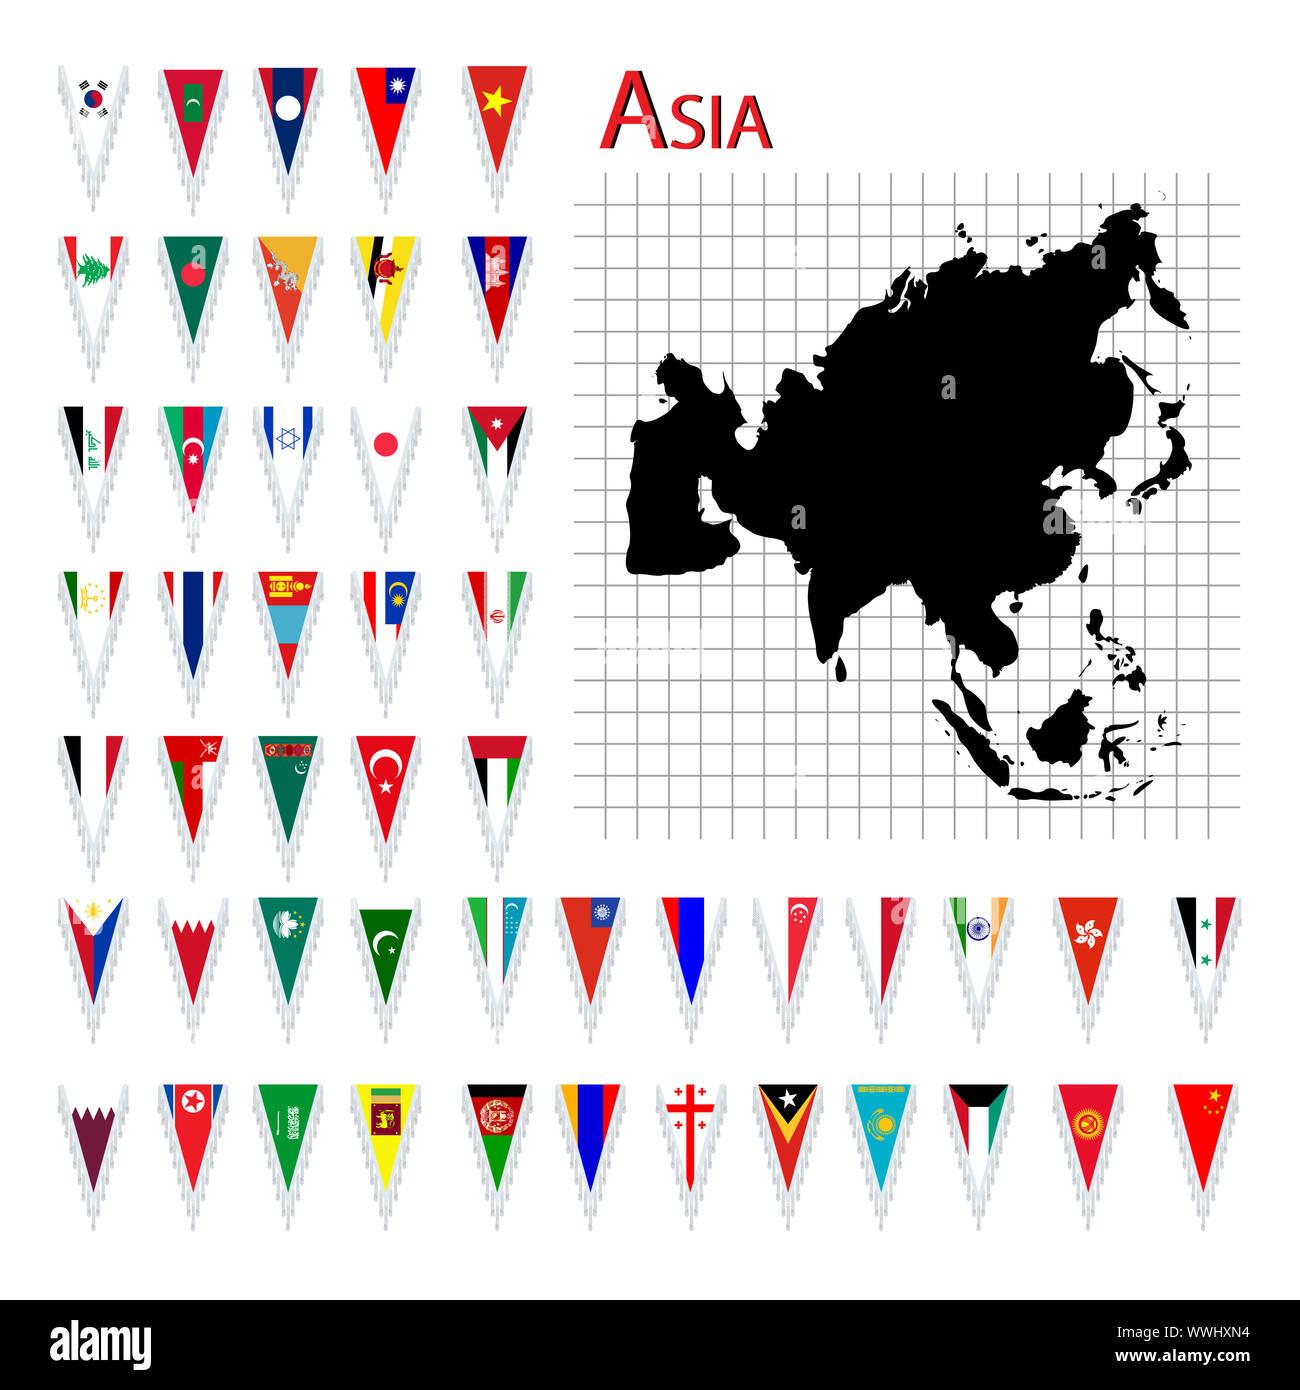 Complete set of Asia flags and map, isolated and grouped objects over white background Stock Photo